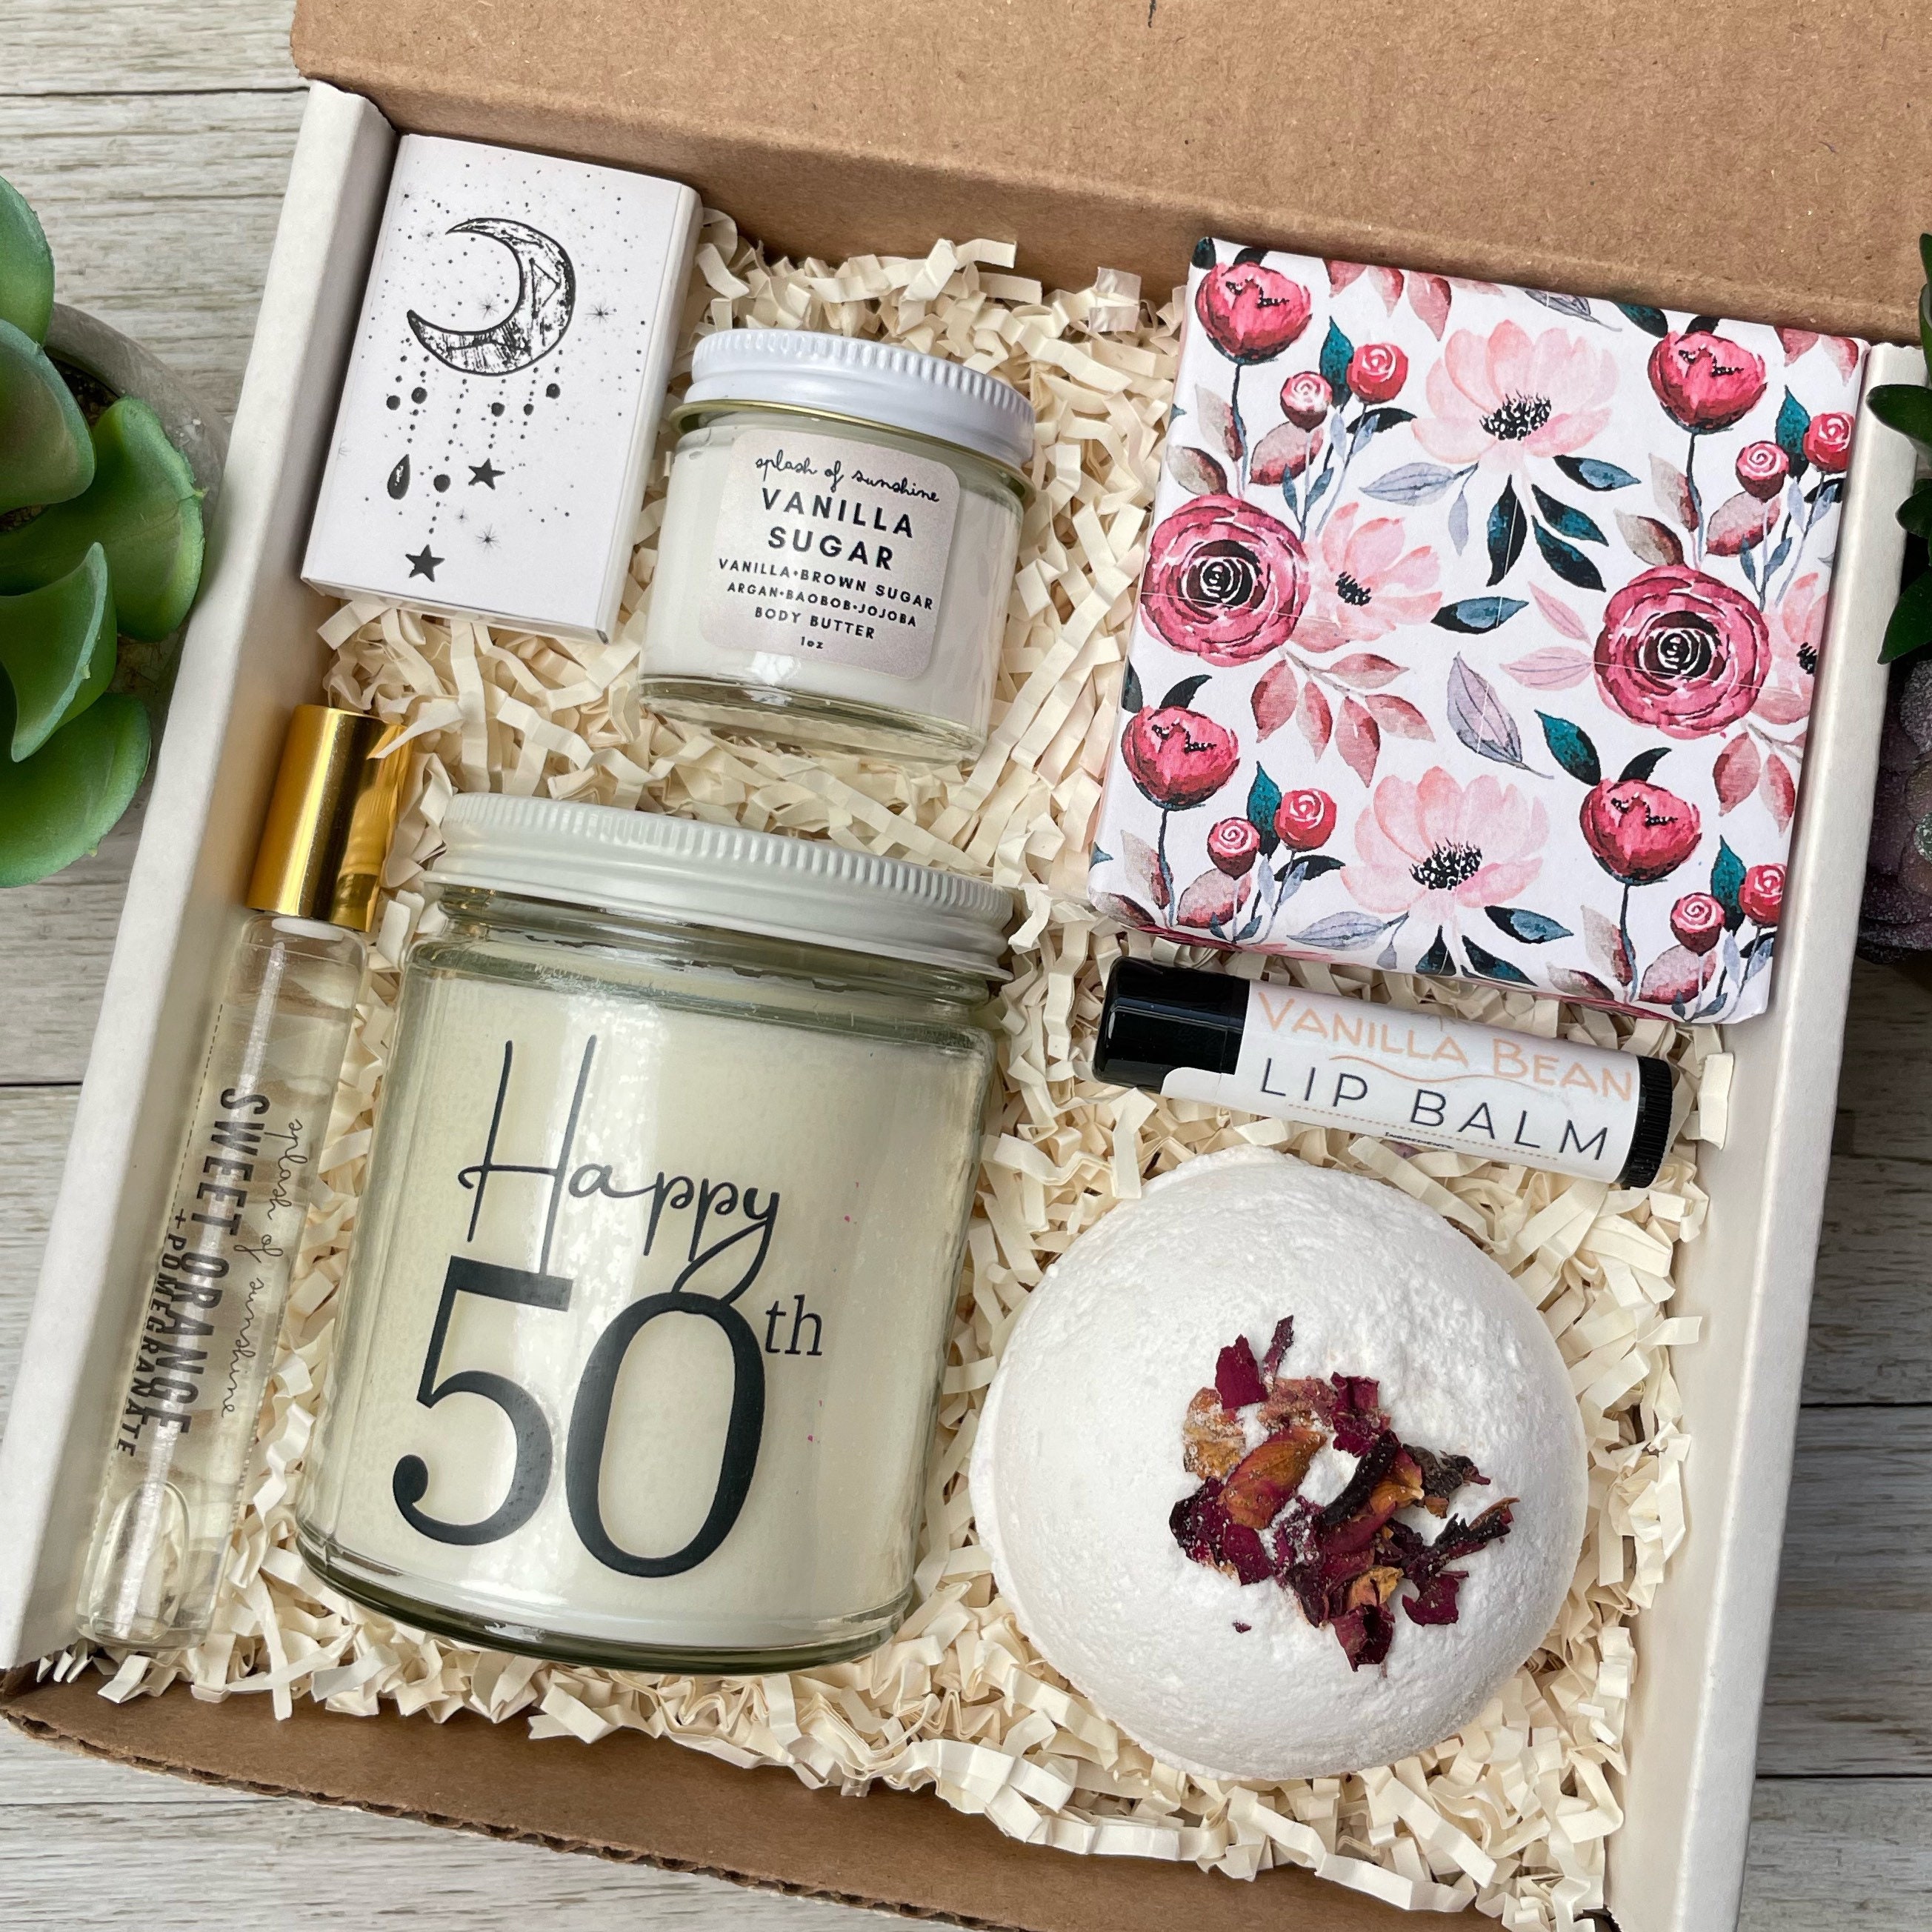 50th Birthday Gifts For Women, Happy 50th Birthday Gifts Basket For Her  Best Friend Mom Sister Wife Coworker Turning 50, Gift For 50 Year Old Woman